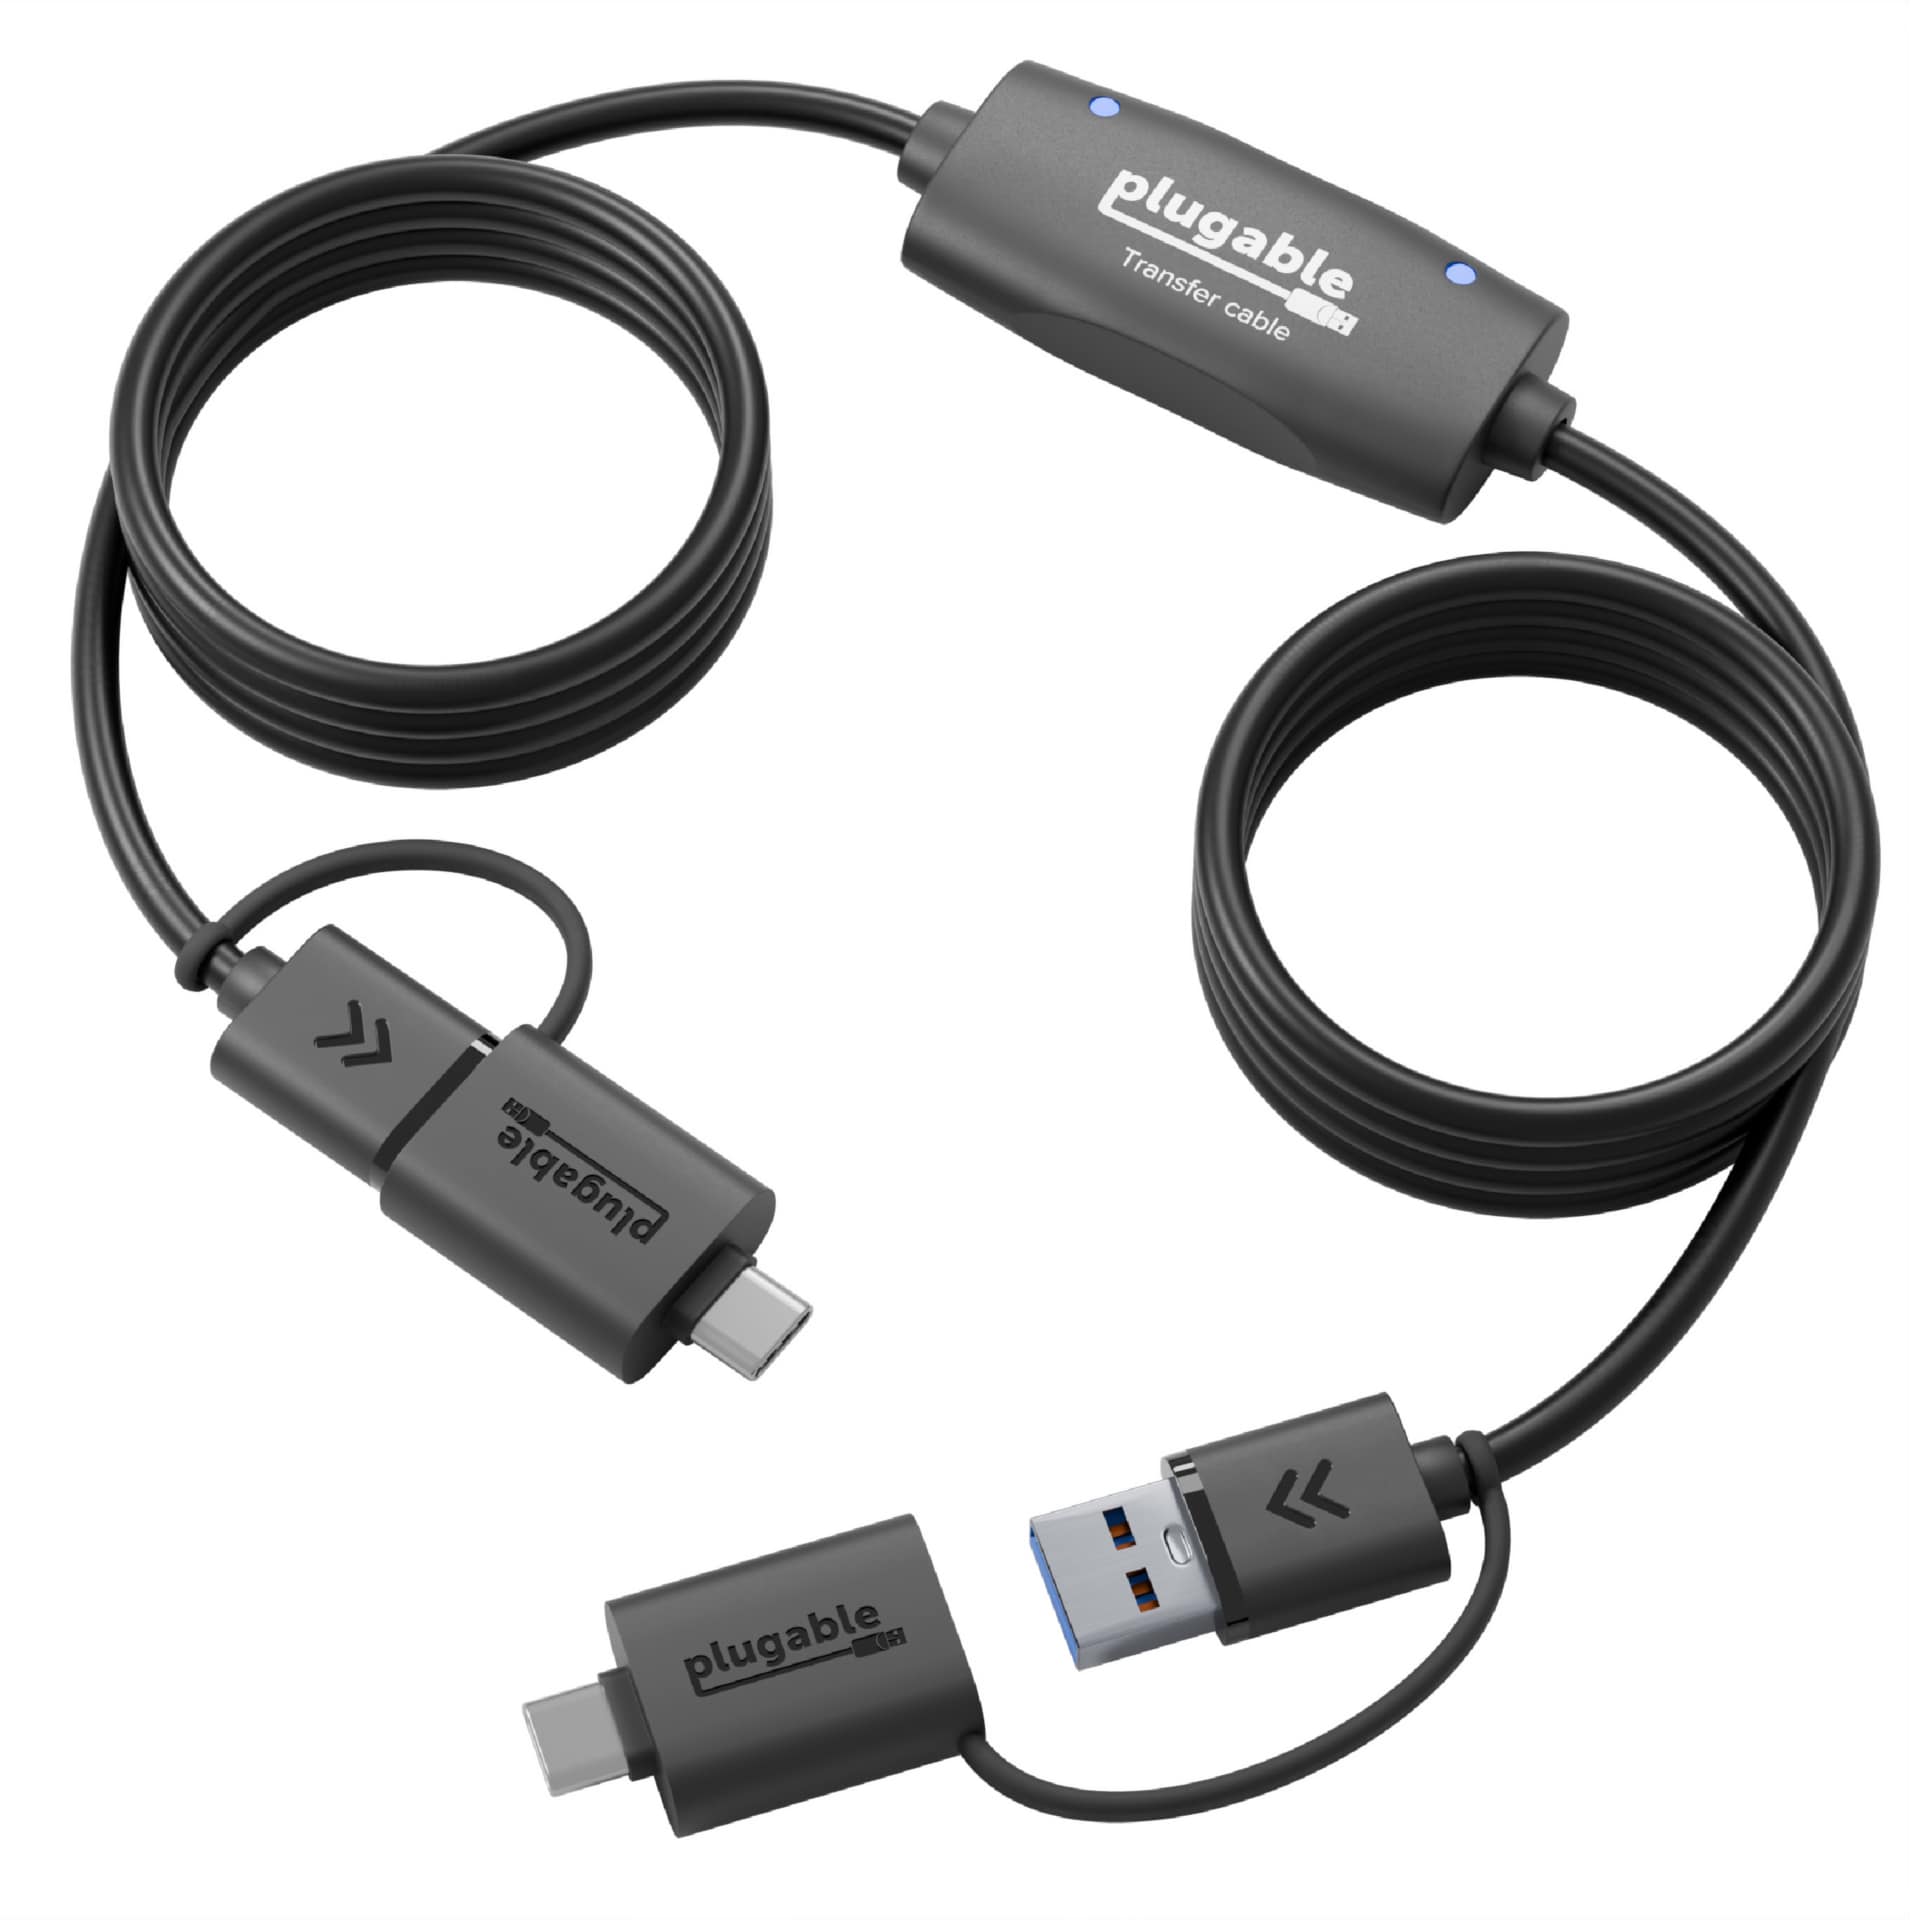 Plugable USB 3.0 Transfer Cable, Transfer Data Between 2 Windows PC's, Bravura Easy Computer Sync Software Included